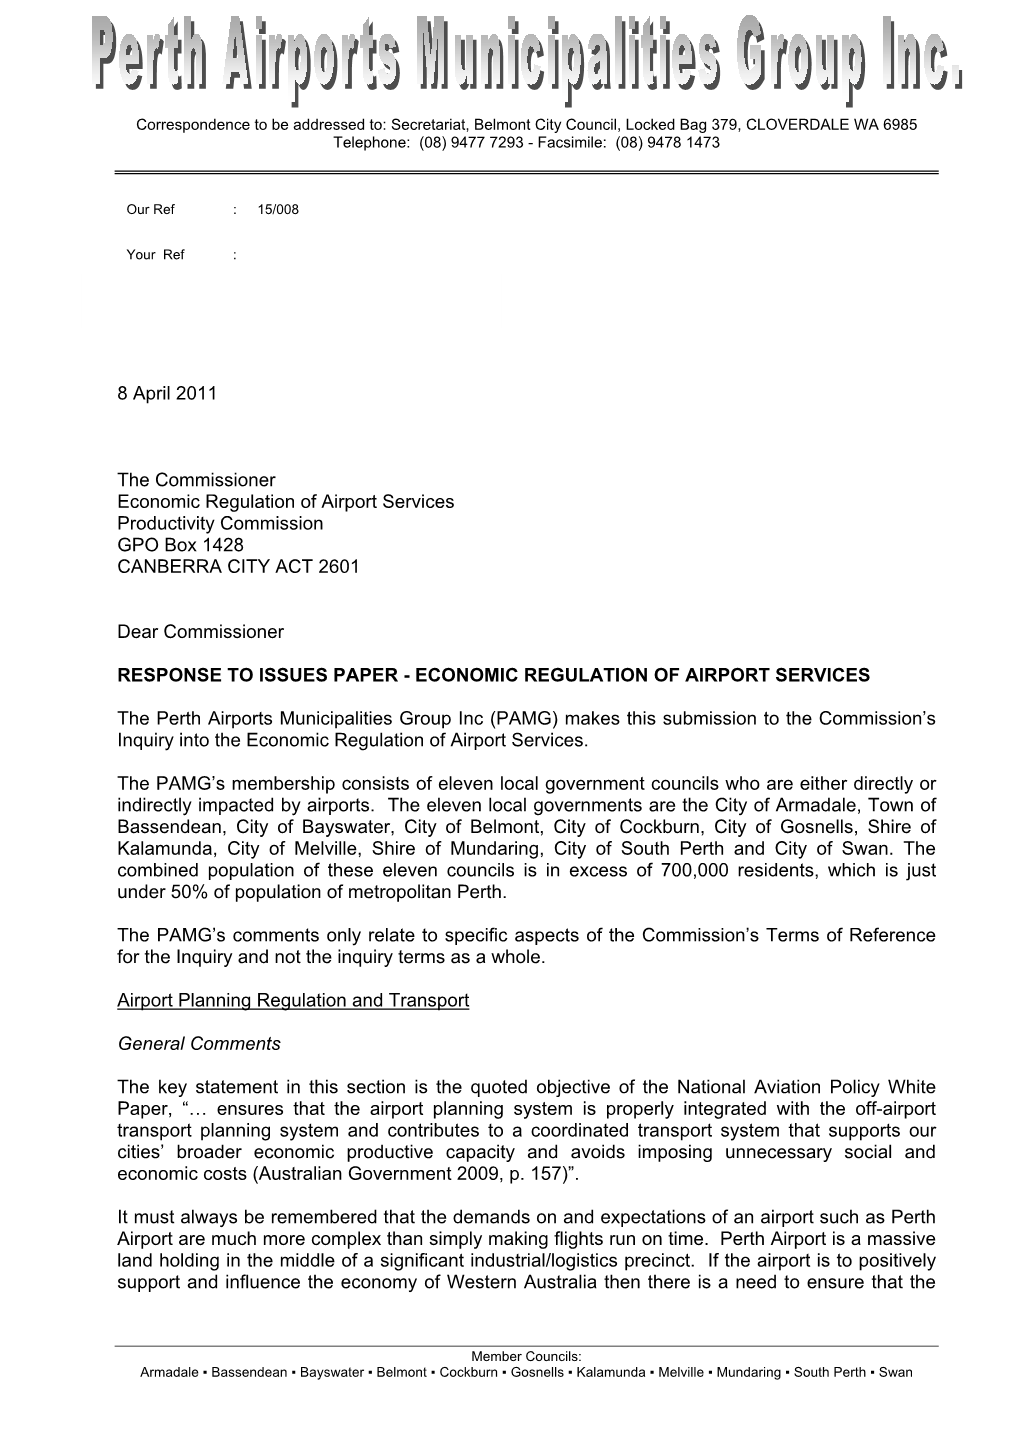 Perth Airports Municipalities Group Inc (PAMG) Makes This Submission to the Commission’S Inquiry Into the Economic Regulation of Airport Services